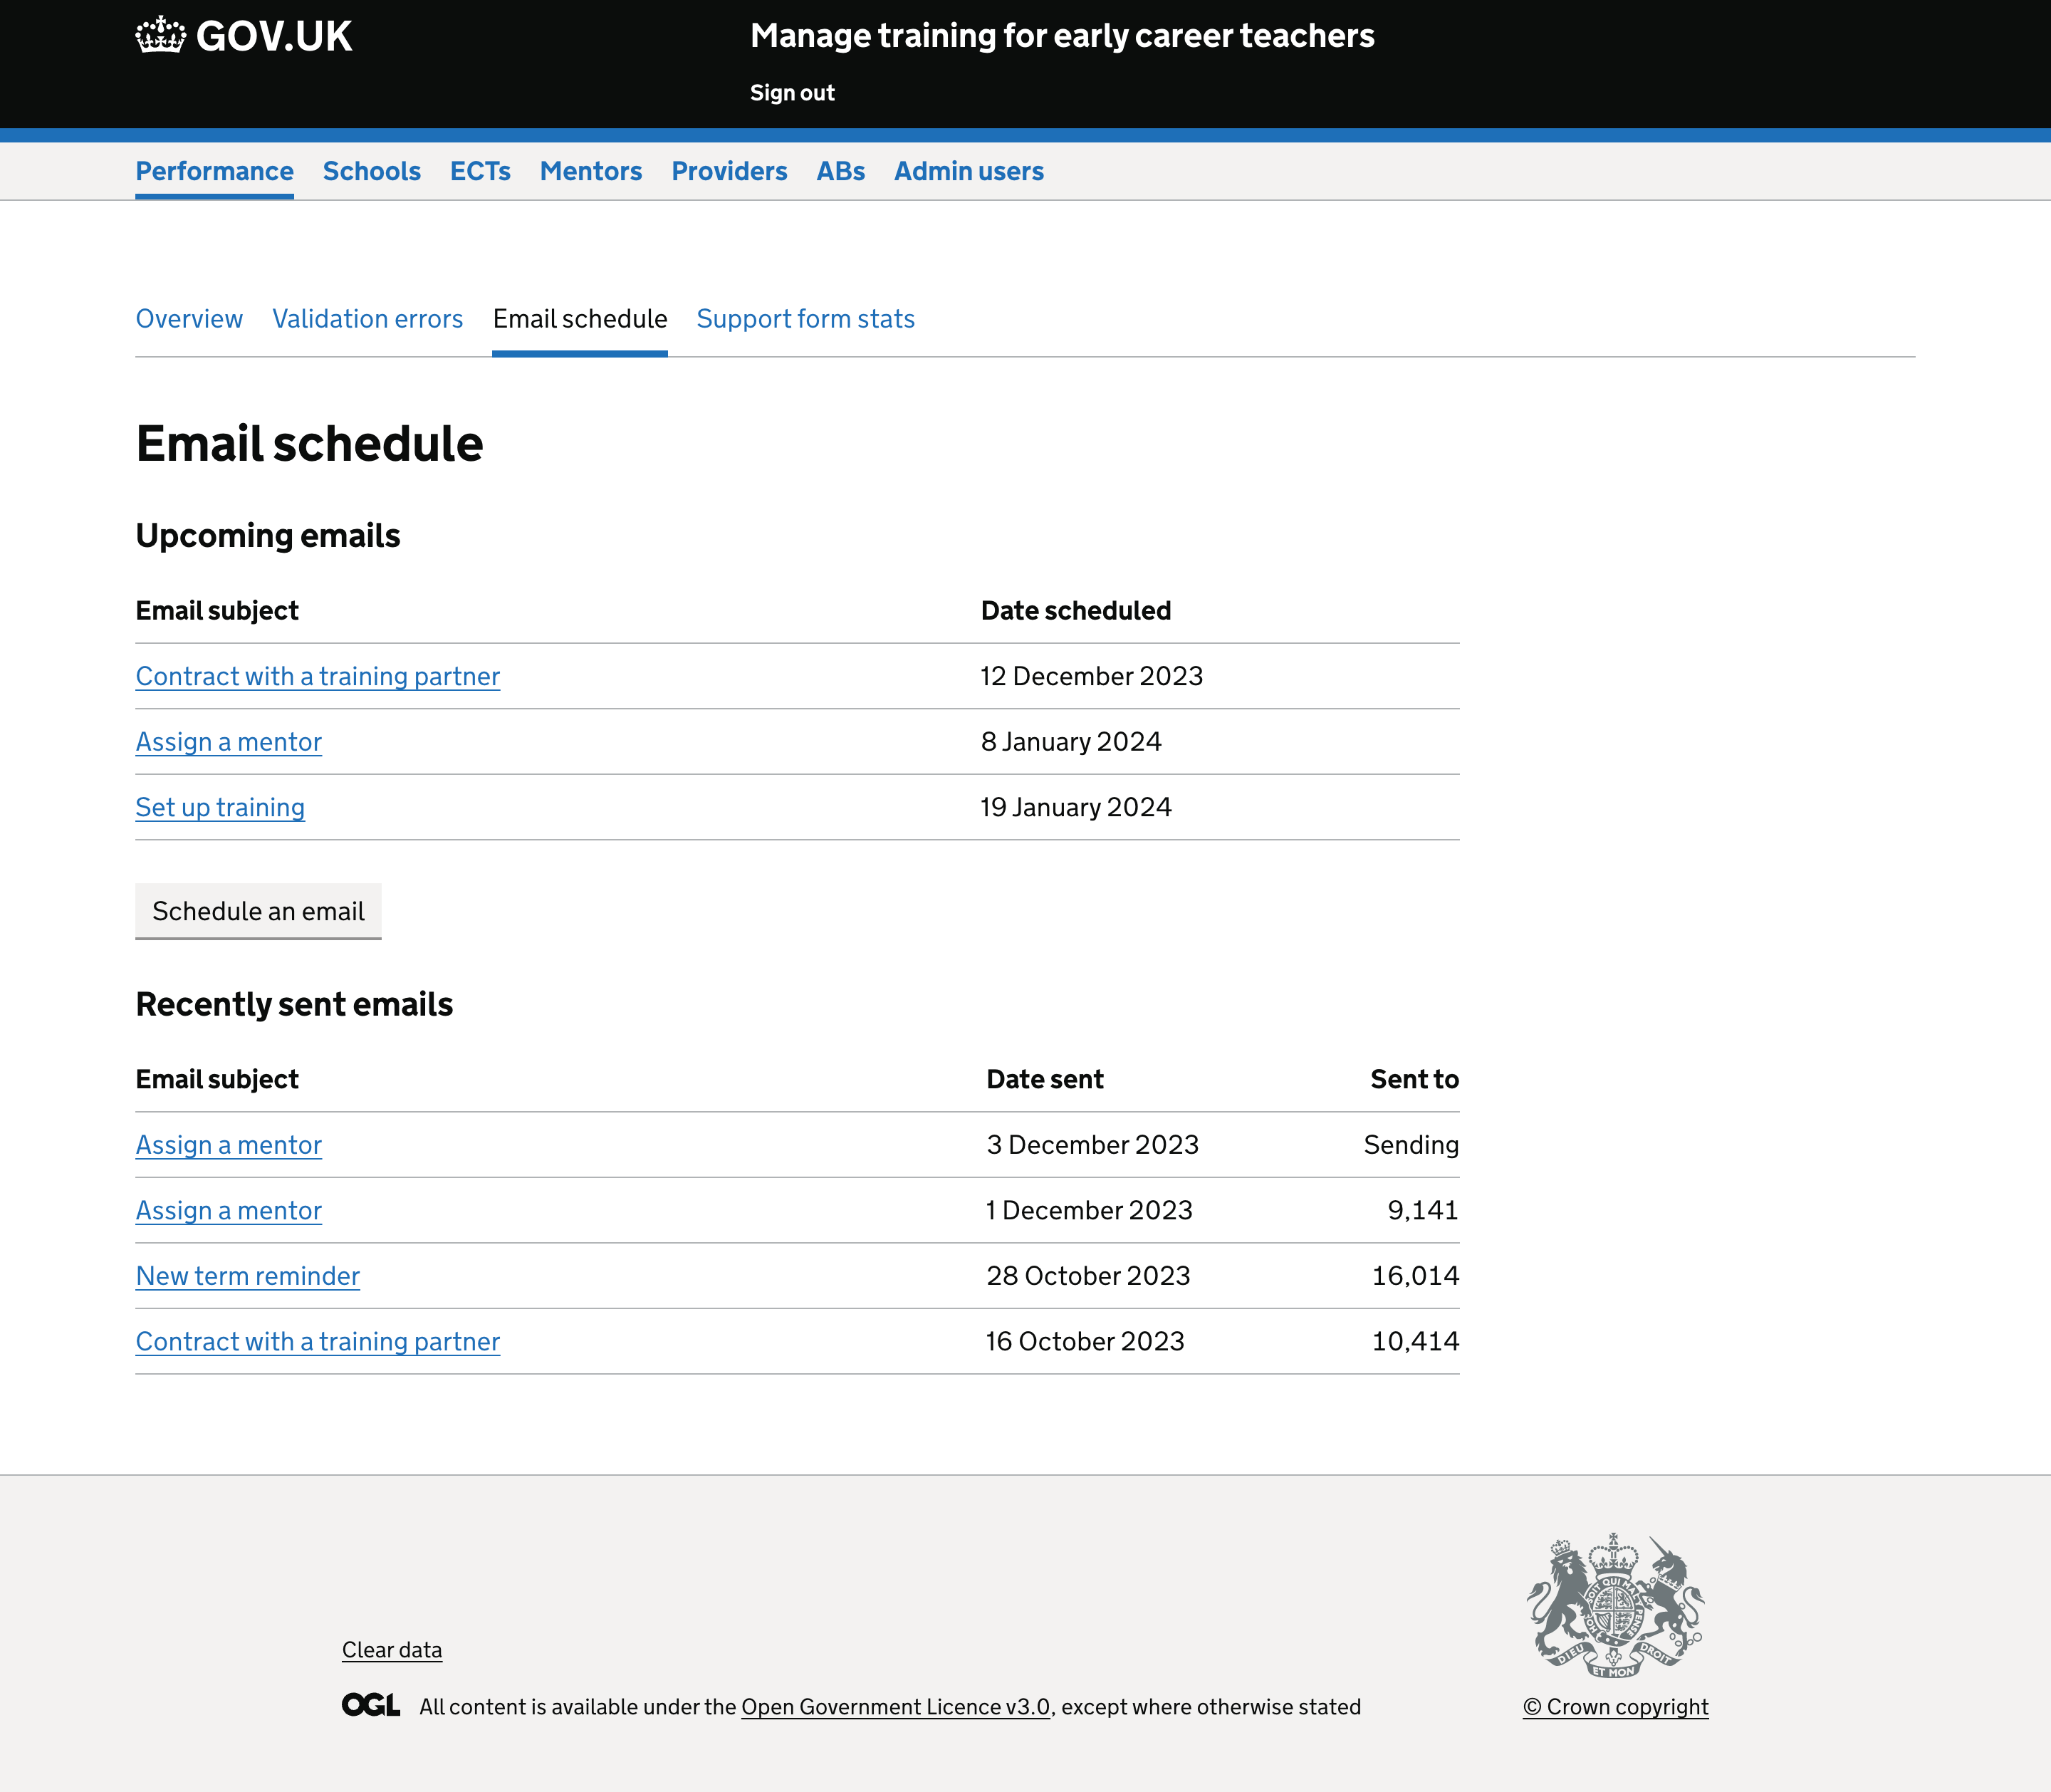 A view of the main scheduling screen in the admin console